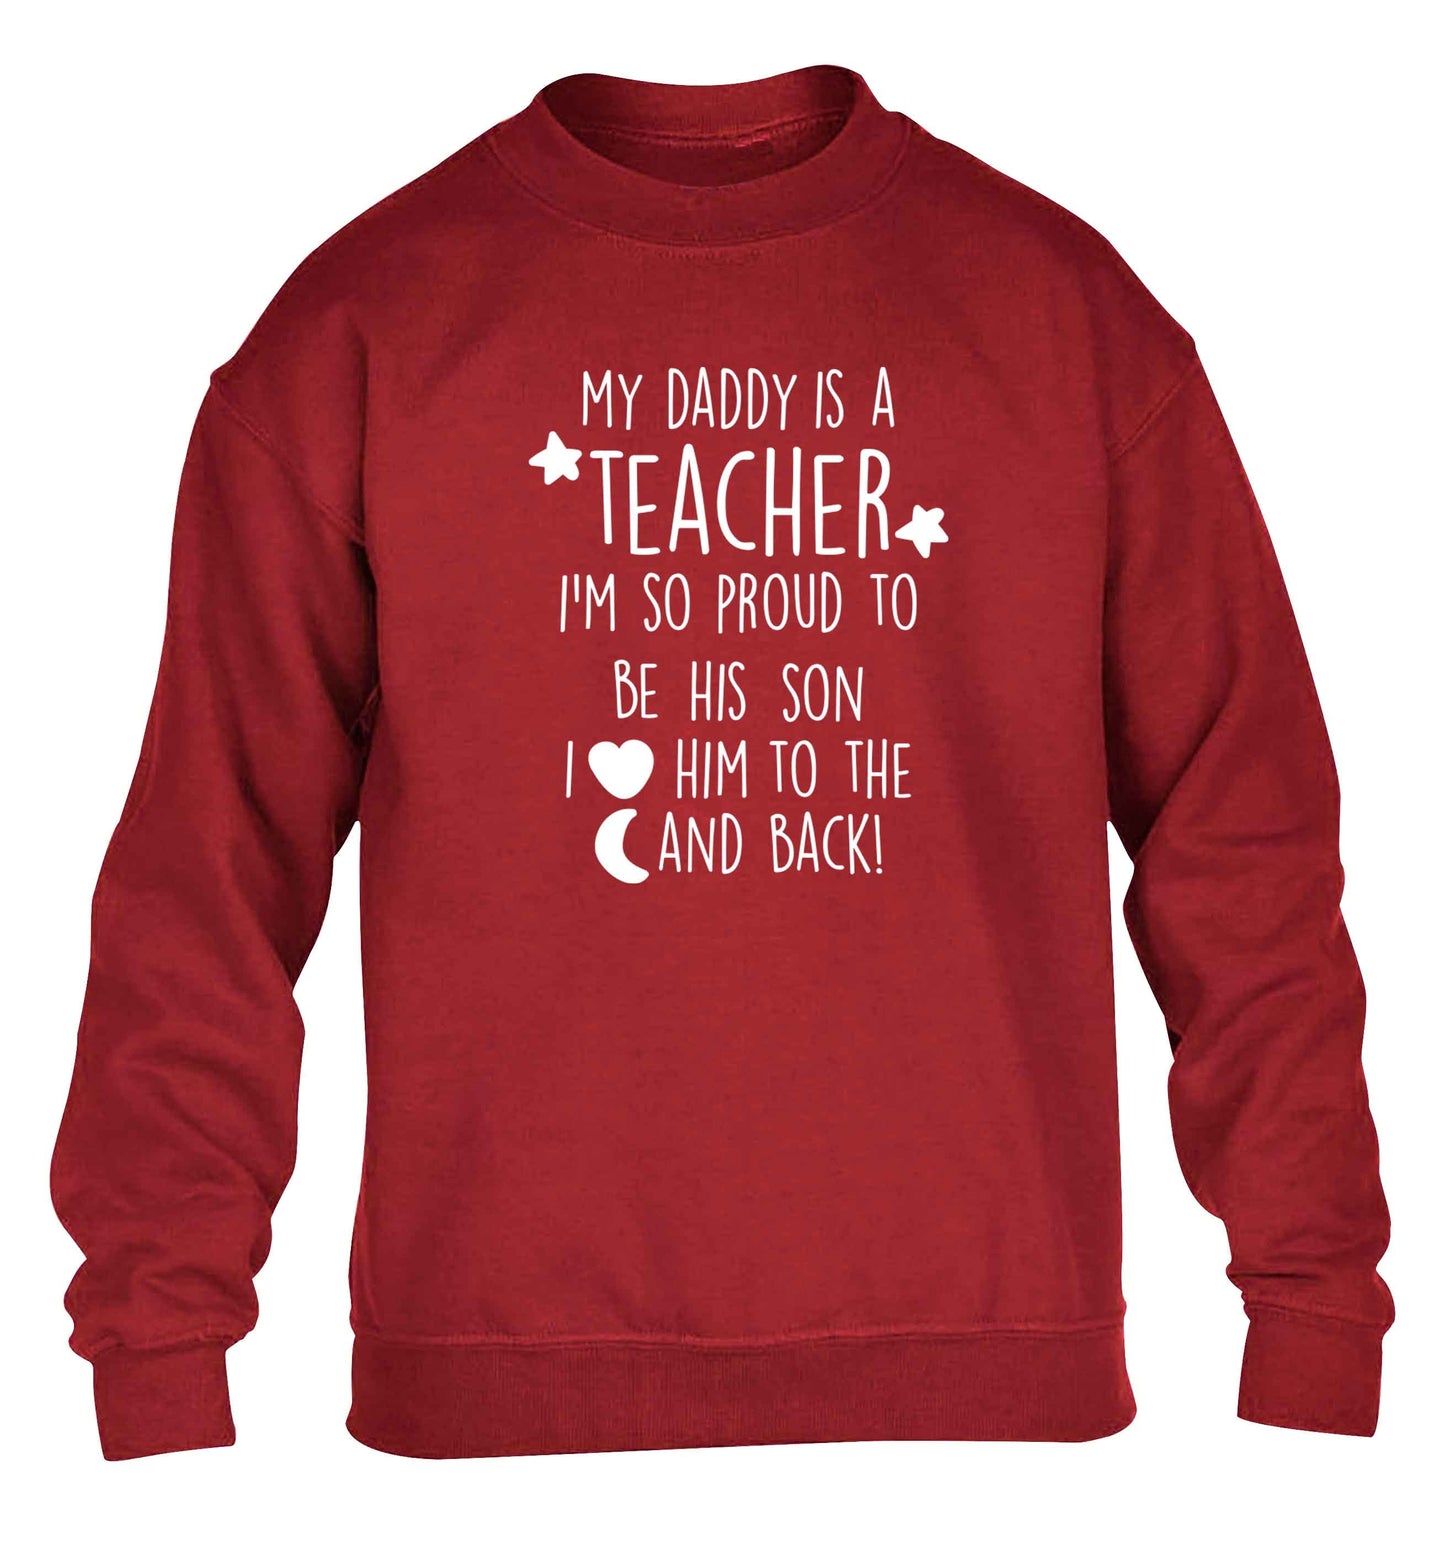 My daddy is a teacher I'm so proud to be his son I love her to the moon and back children's grey sweater 12-13 Years